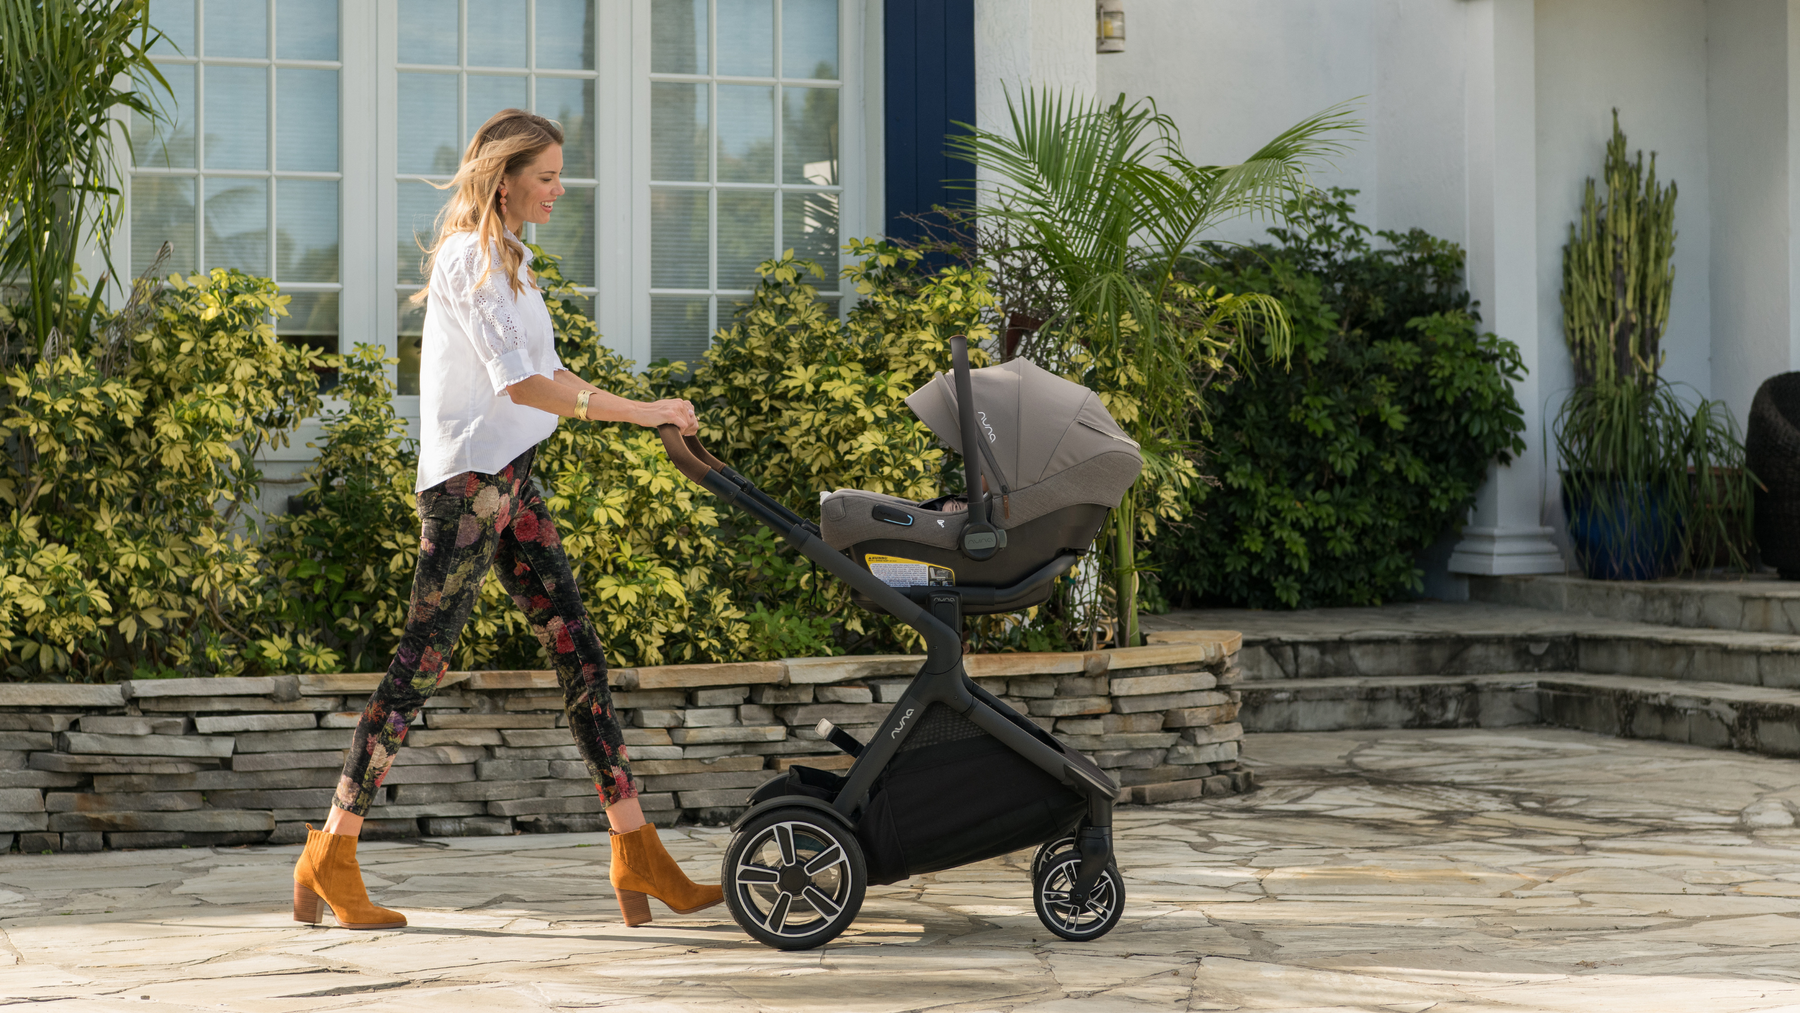 A Mother Taking Her Child for A Walk in A Nuna Stroller